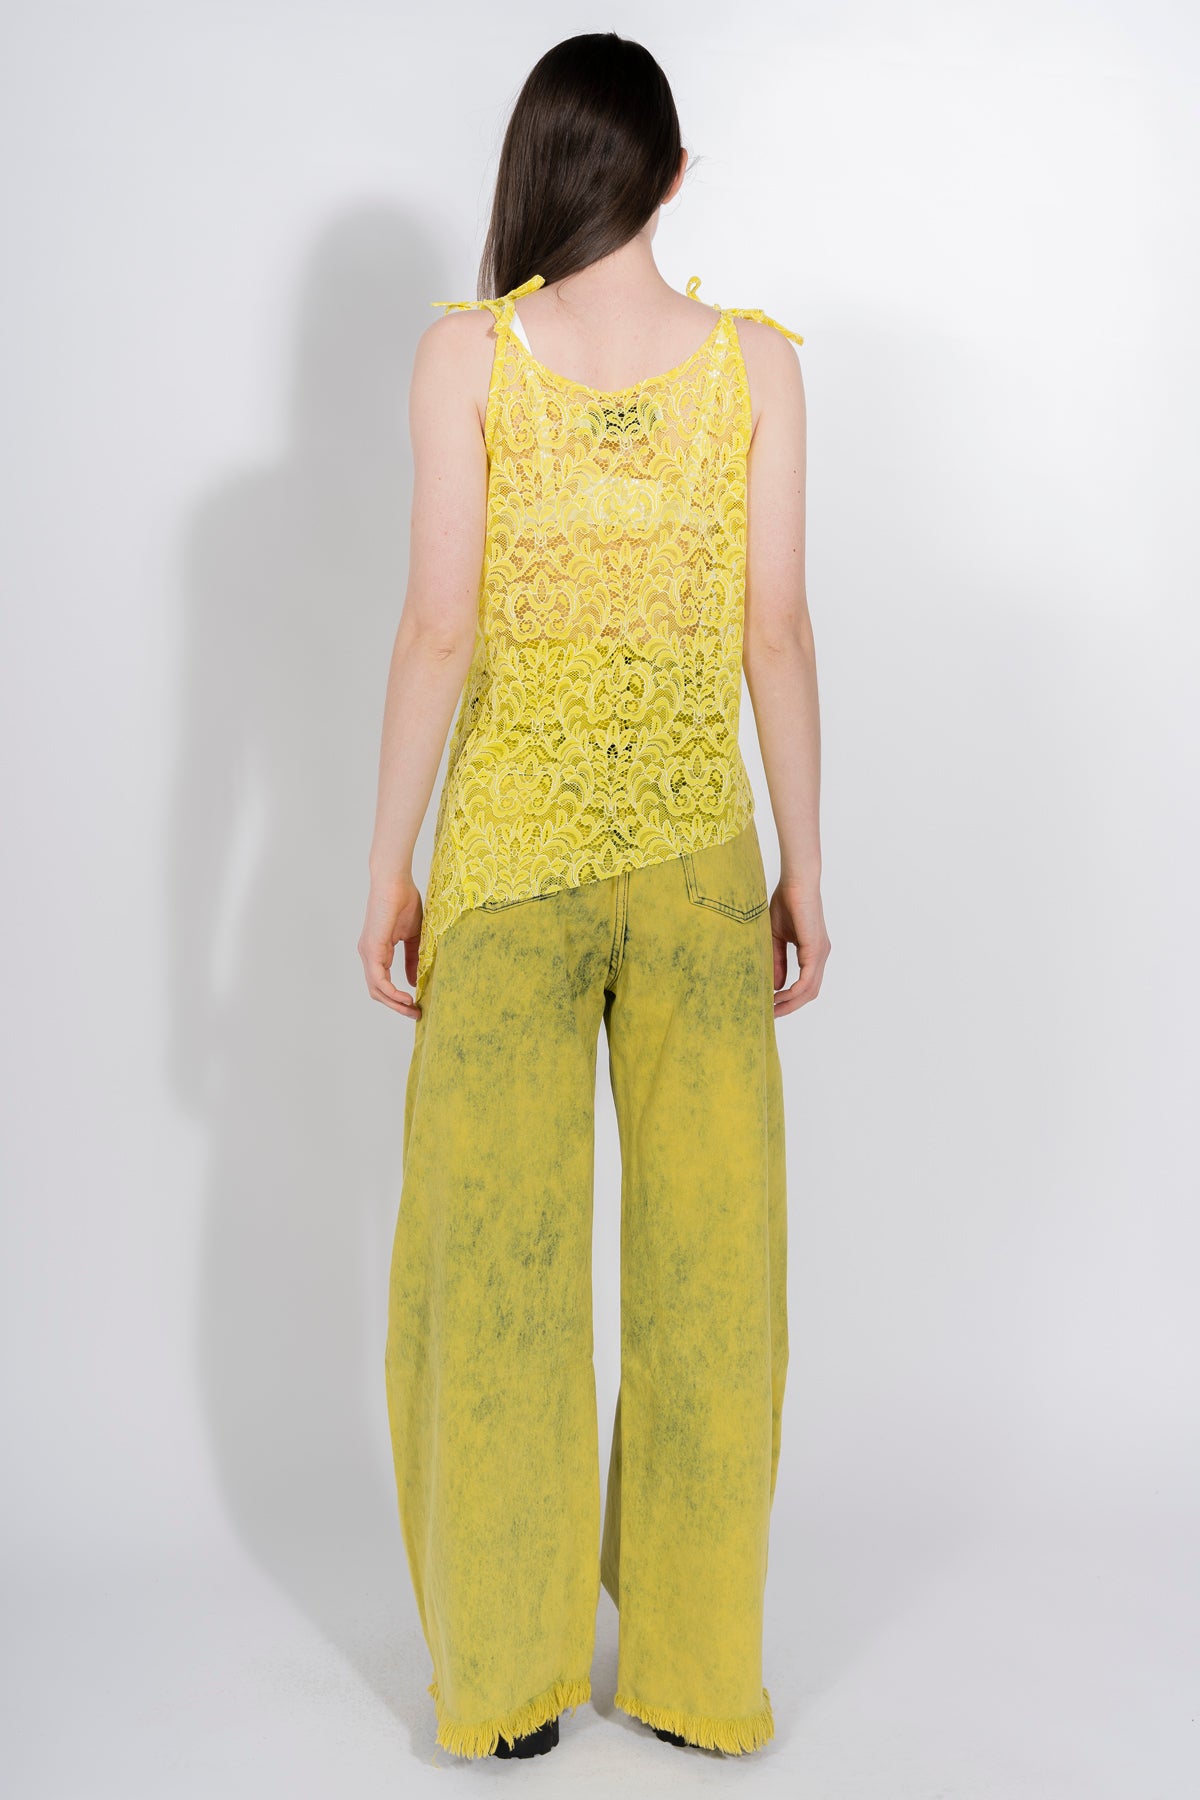 LACE SLIP TOP IN YELLOW marques almeida